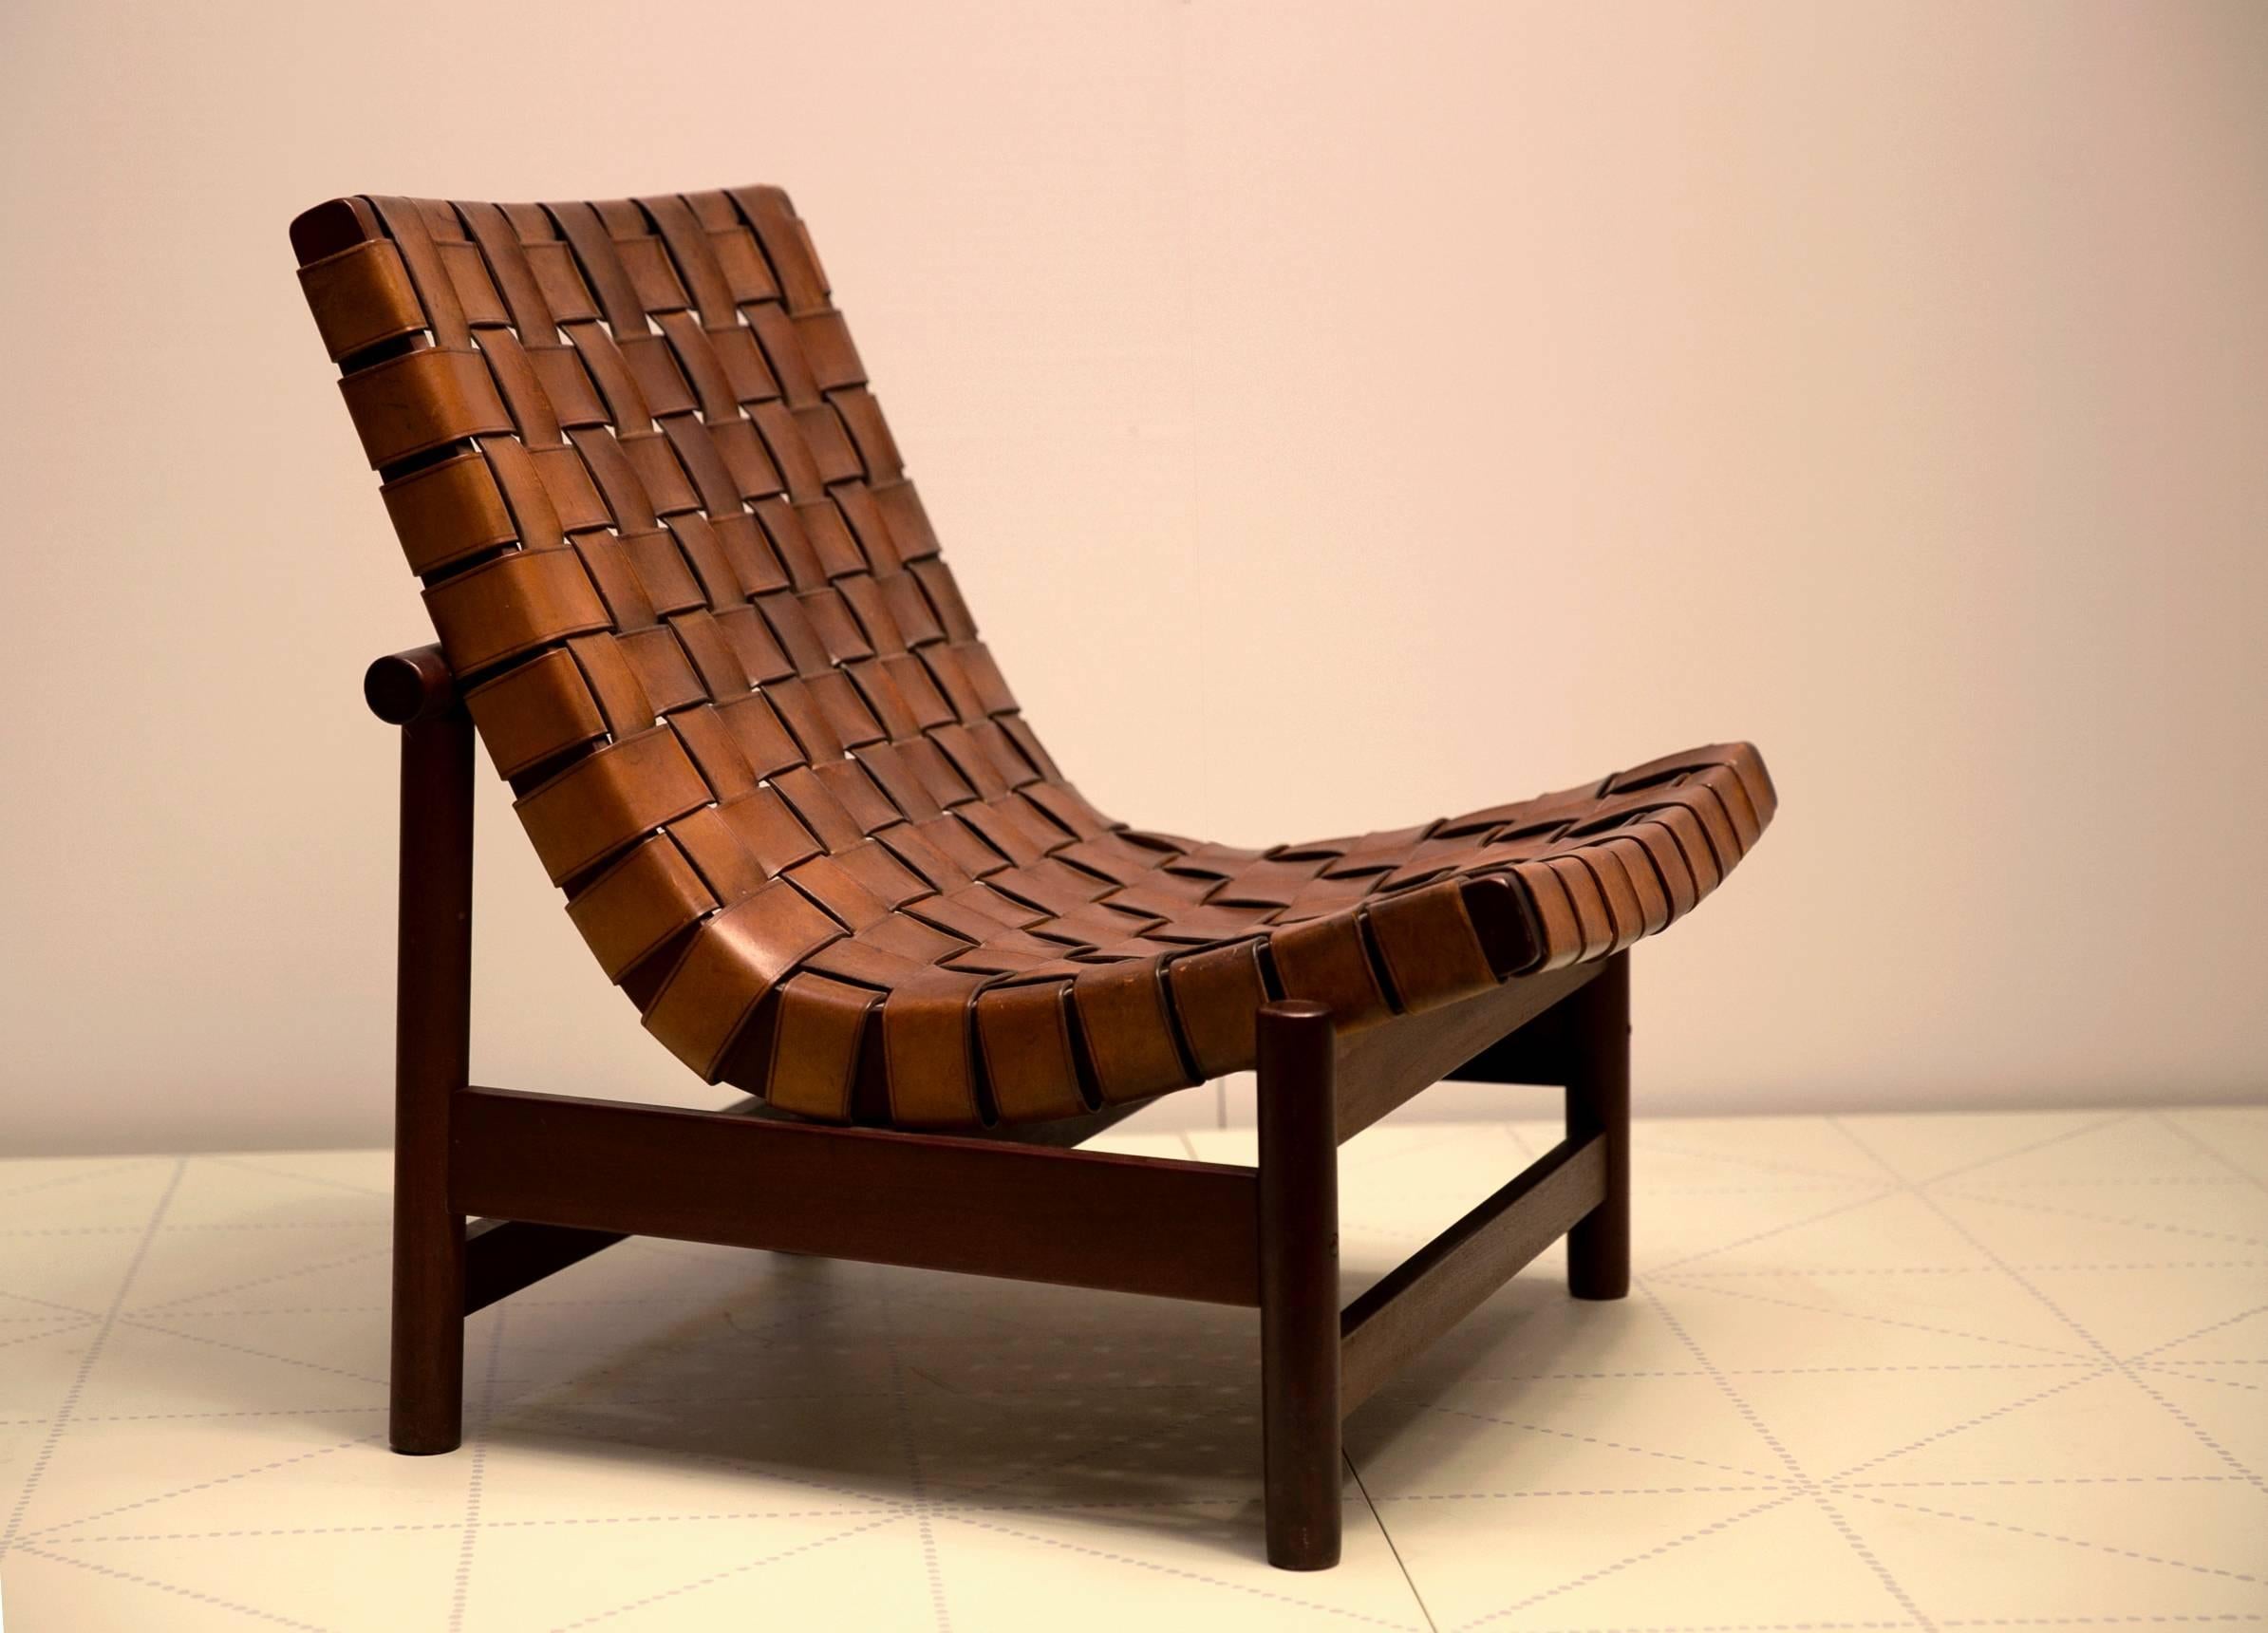 This comfortable lounge chair was made by Dujo, Cuba, a department of the union of furniture, lighting and decoration companies in Cuba.   

It is a type of Butaque chair (sometimes called a Campeche, Planter's, or Havanna chair), whose form